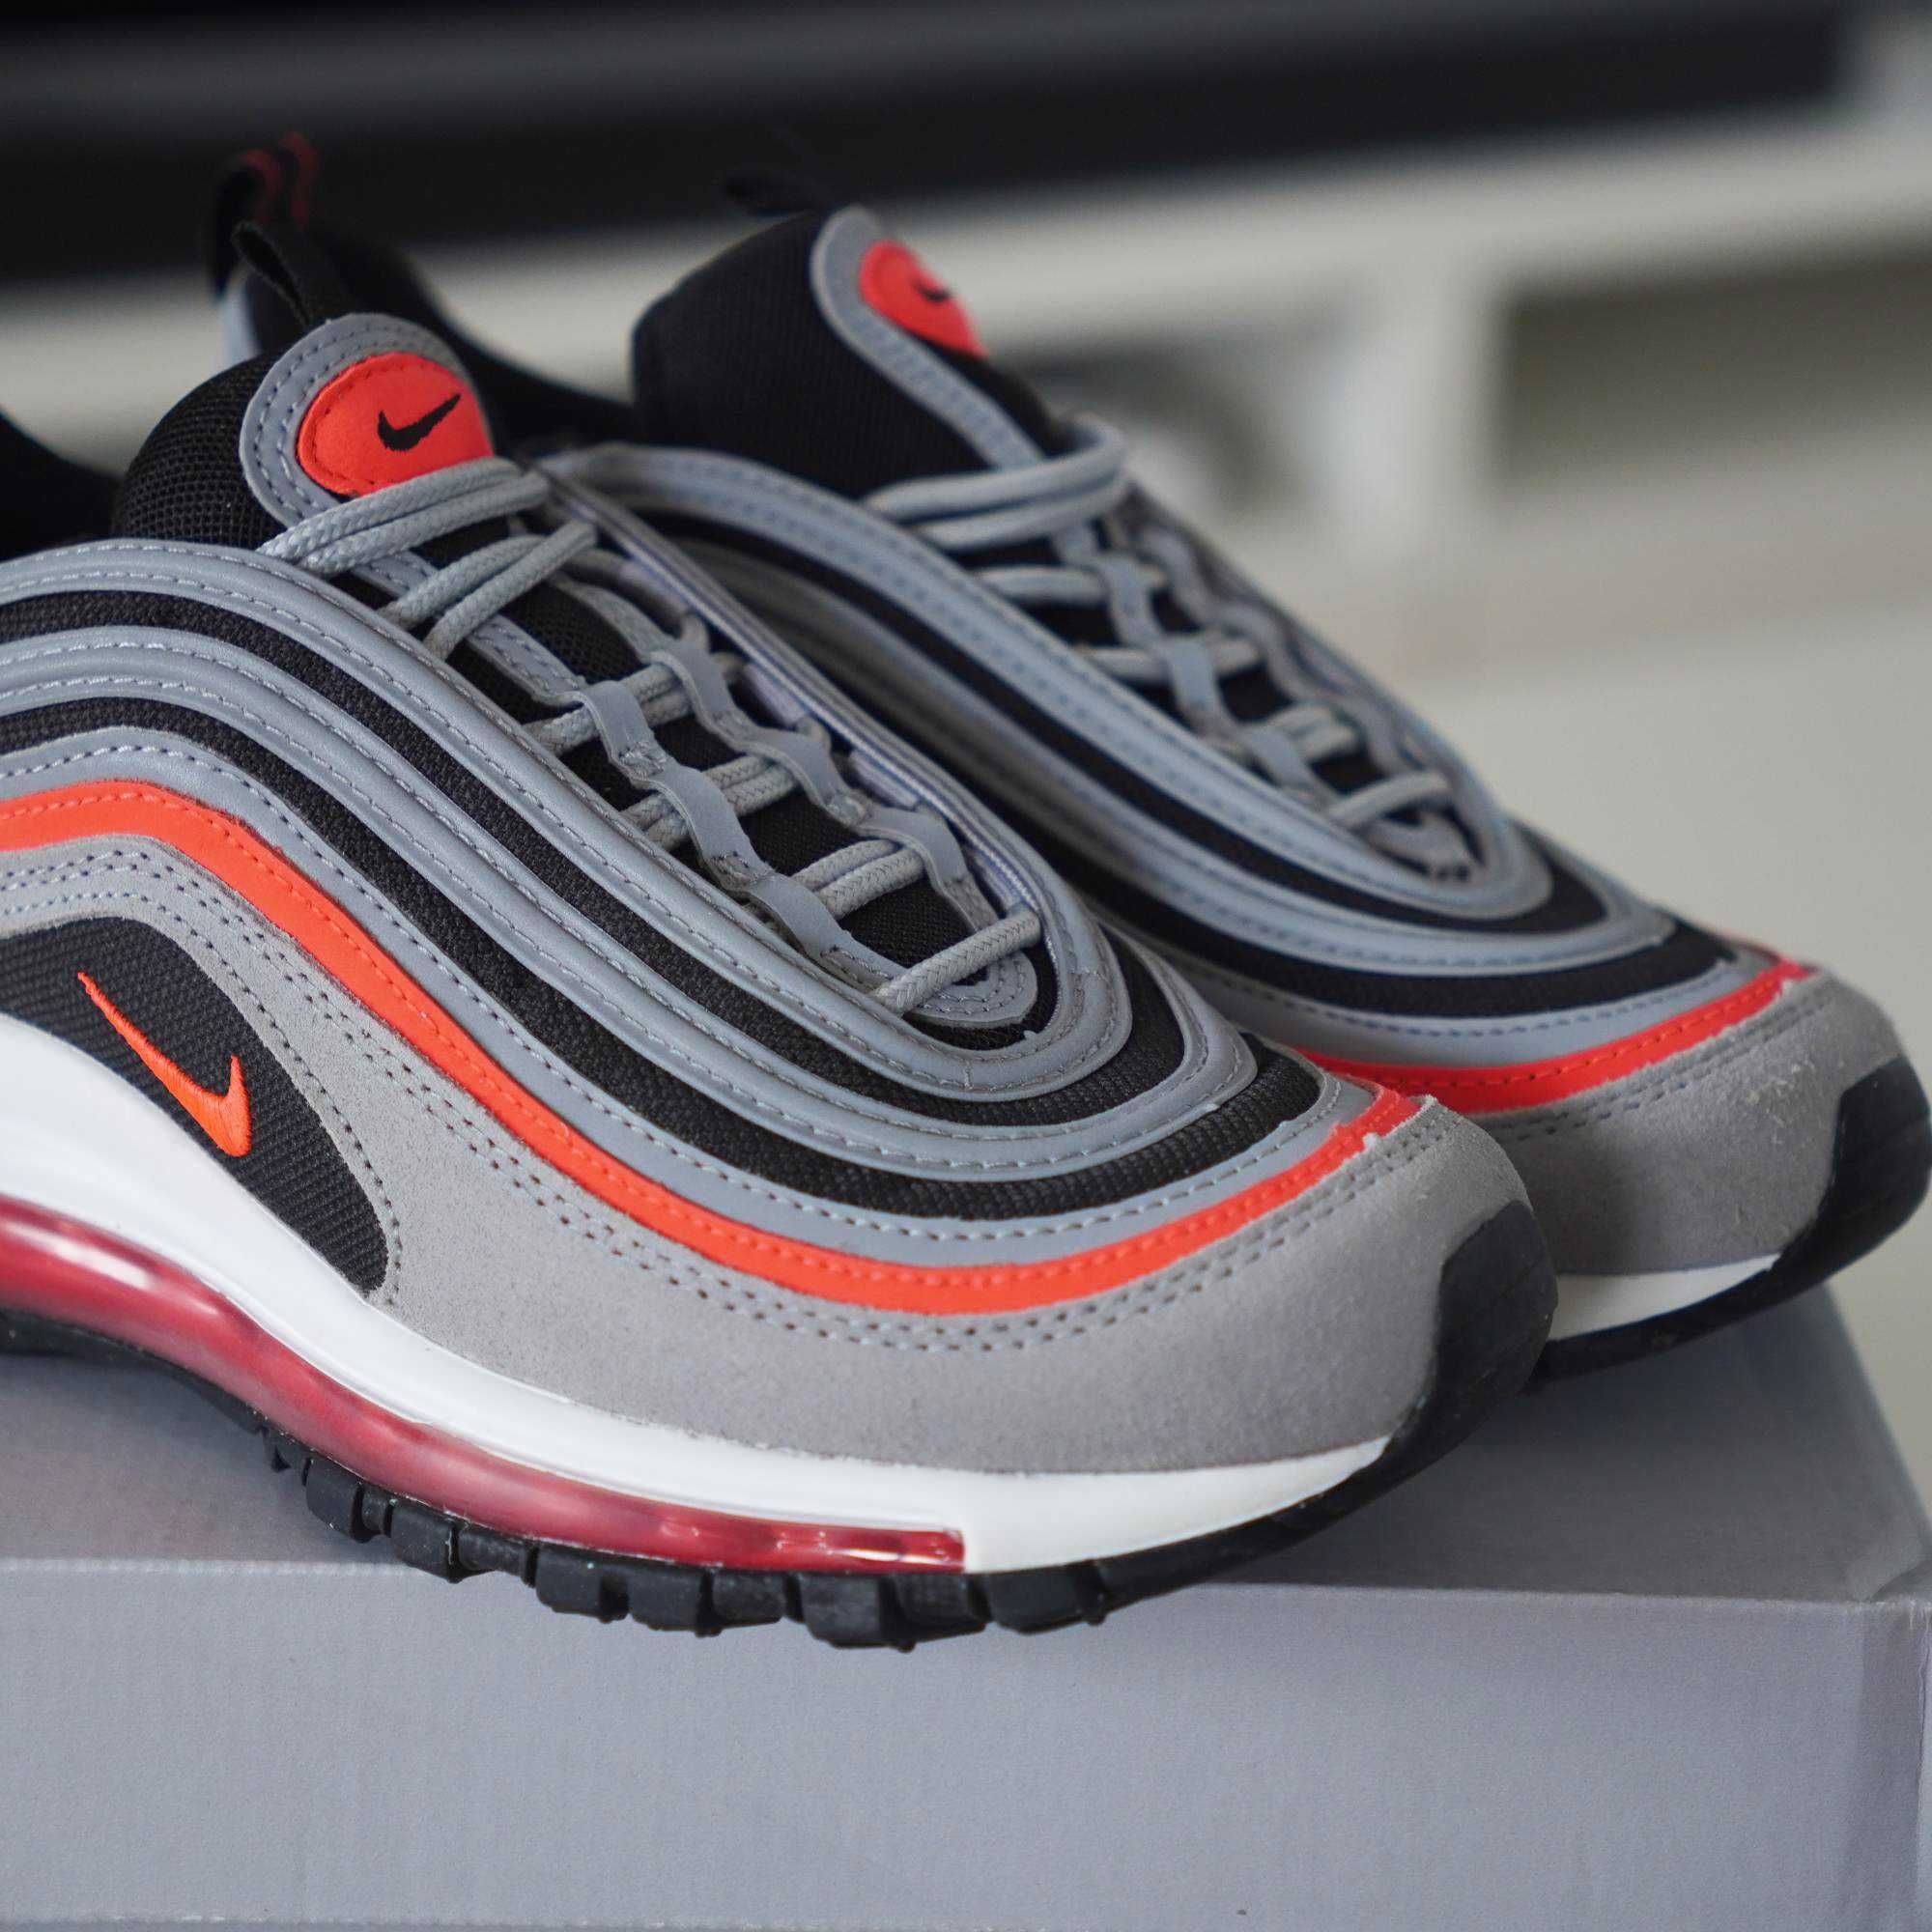 Buty NIKE Air Max 97 - szare - r. 38 - oryginalne